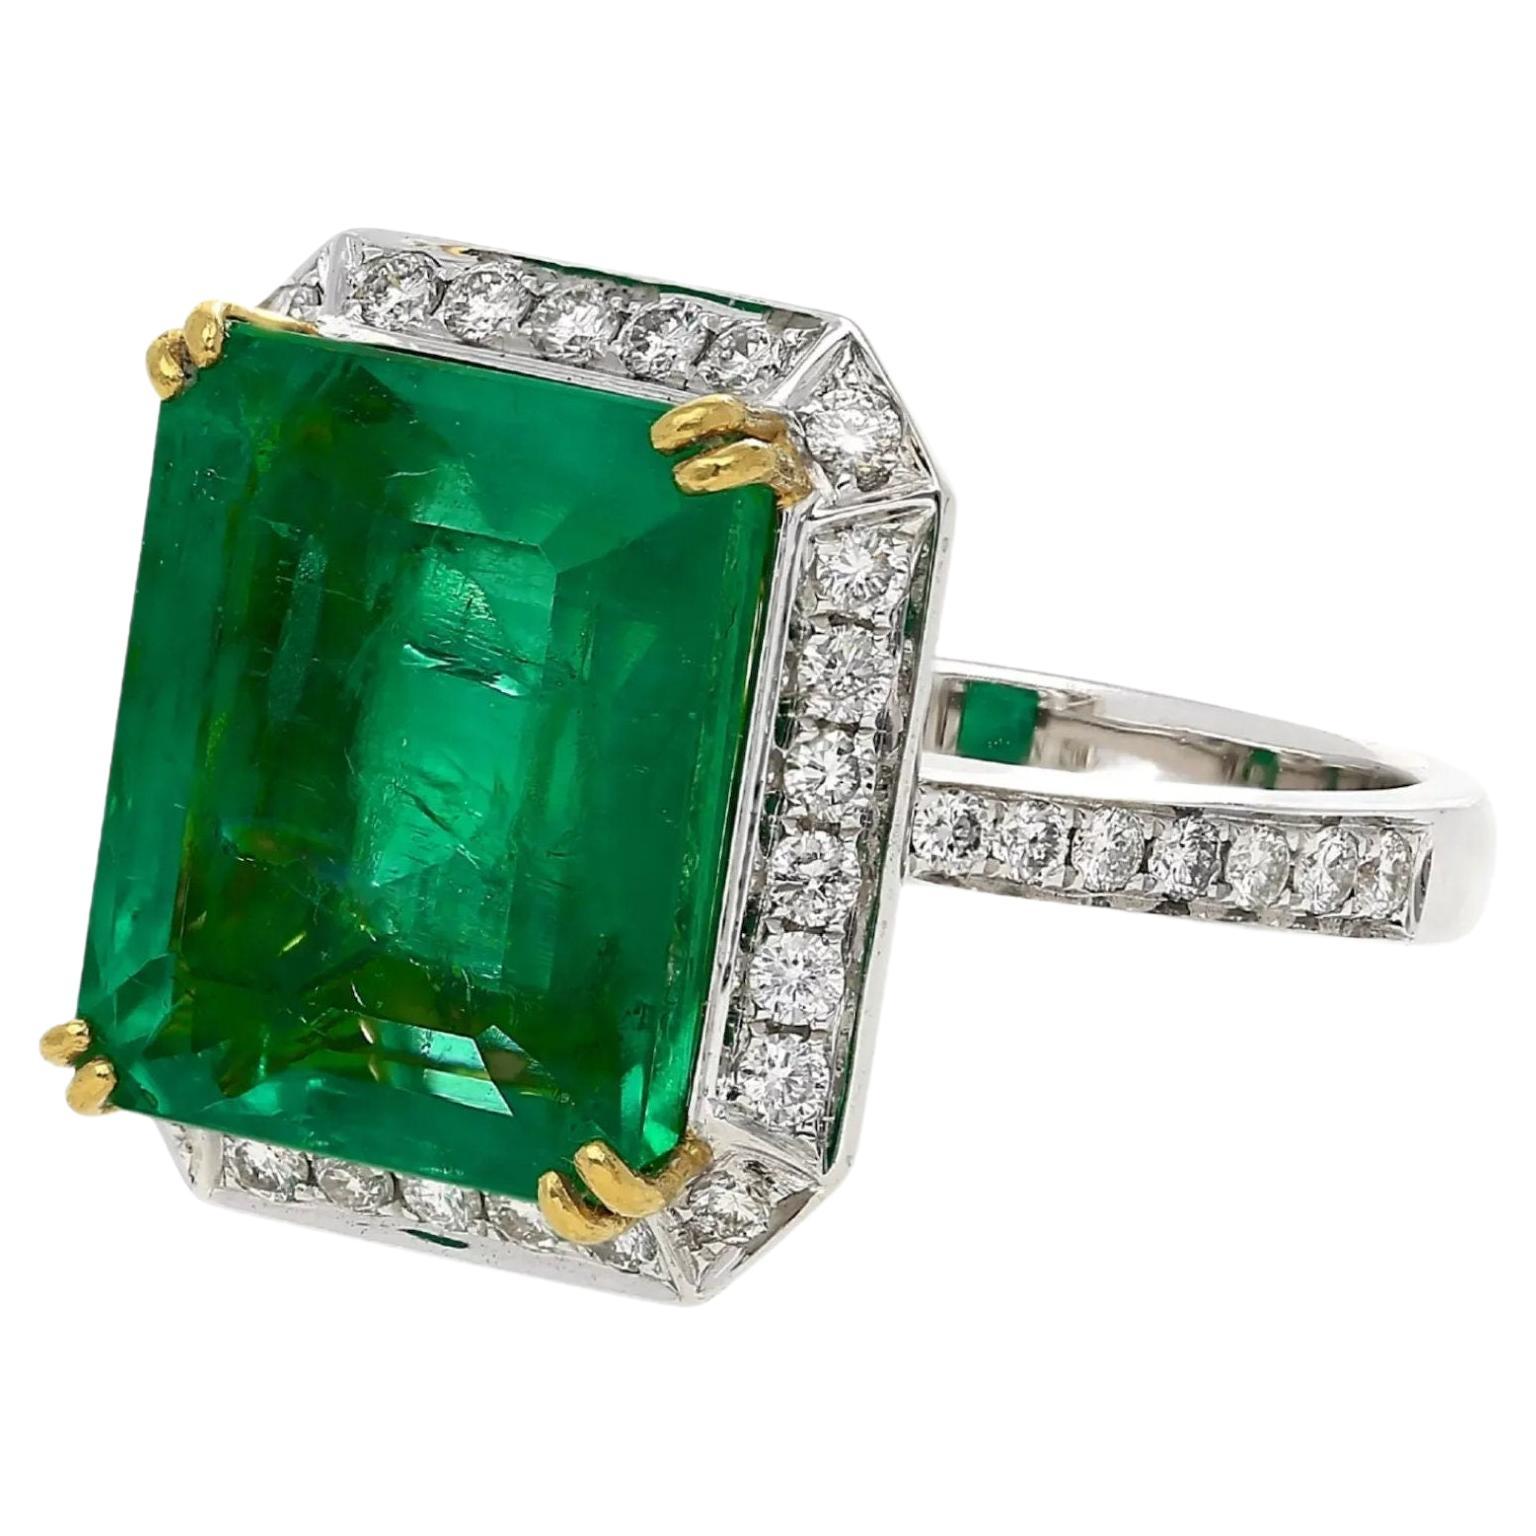 For Sale:  5 Carat Natural Emerald Diamond Engagement Ring Set in 18K Gold, Cocktail Ring